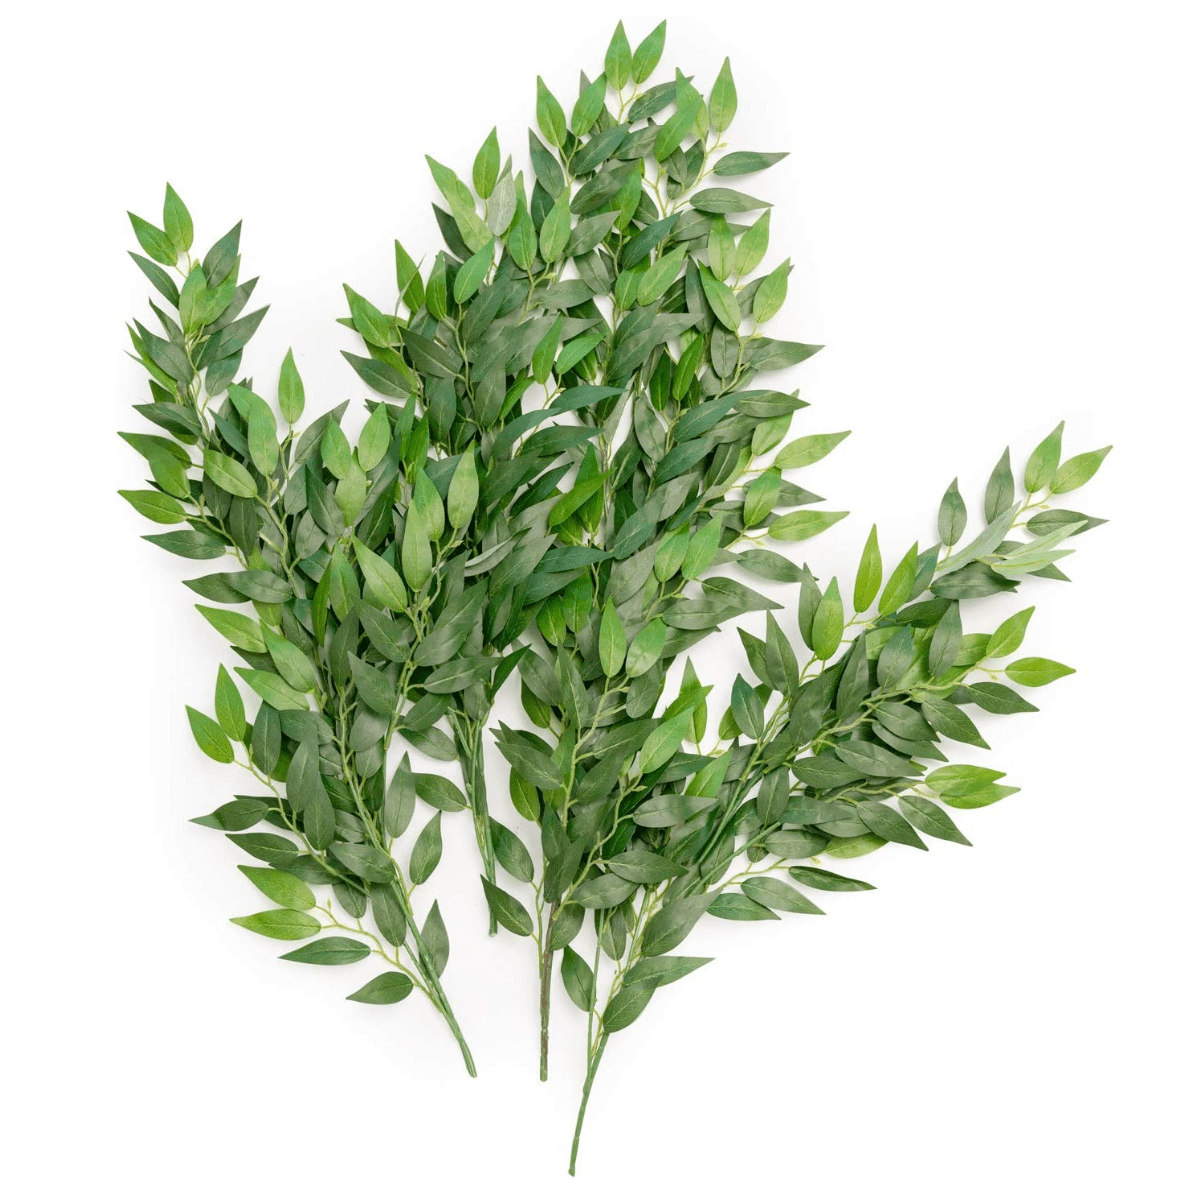 

Lifelike Italian Ruscus Artificial Greenery Stem - 27.55" Uv-resistant Faux Floral Spray For Weddings, Home Decor & Centerpieces